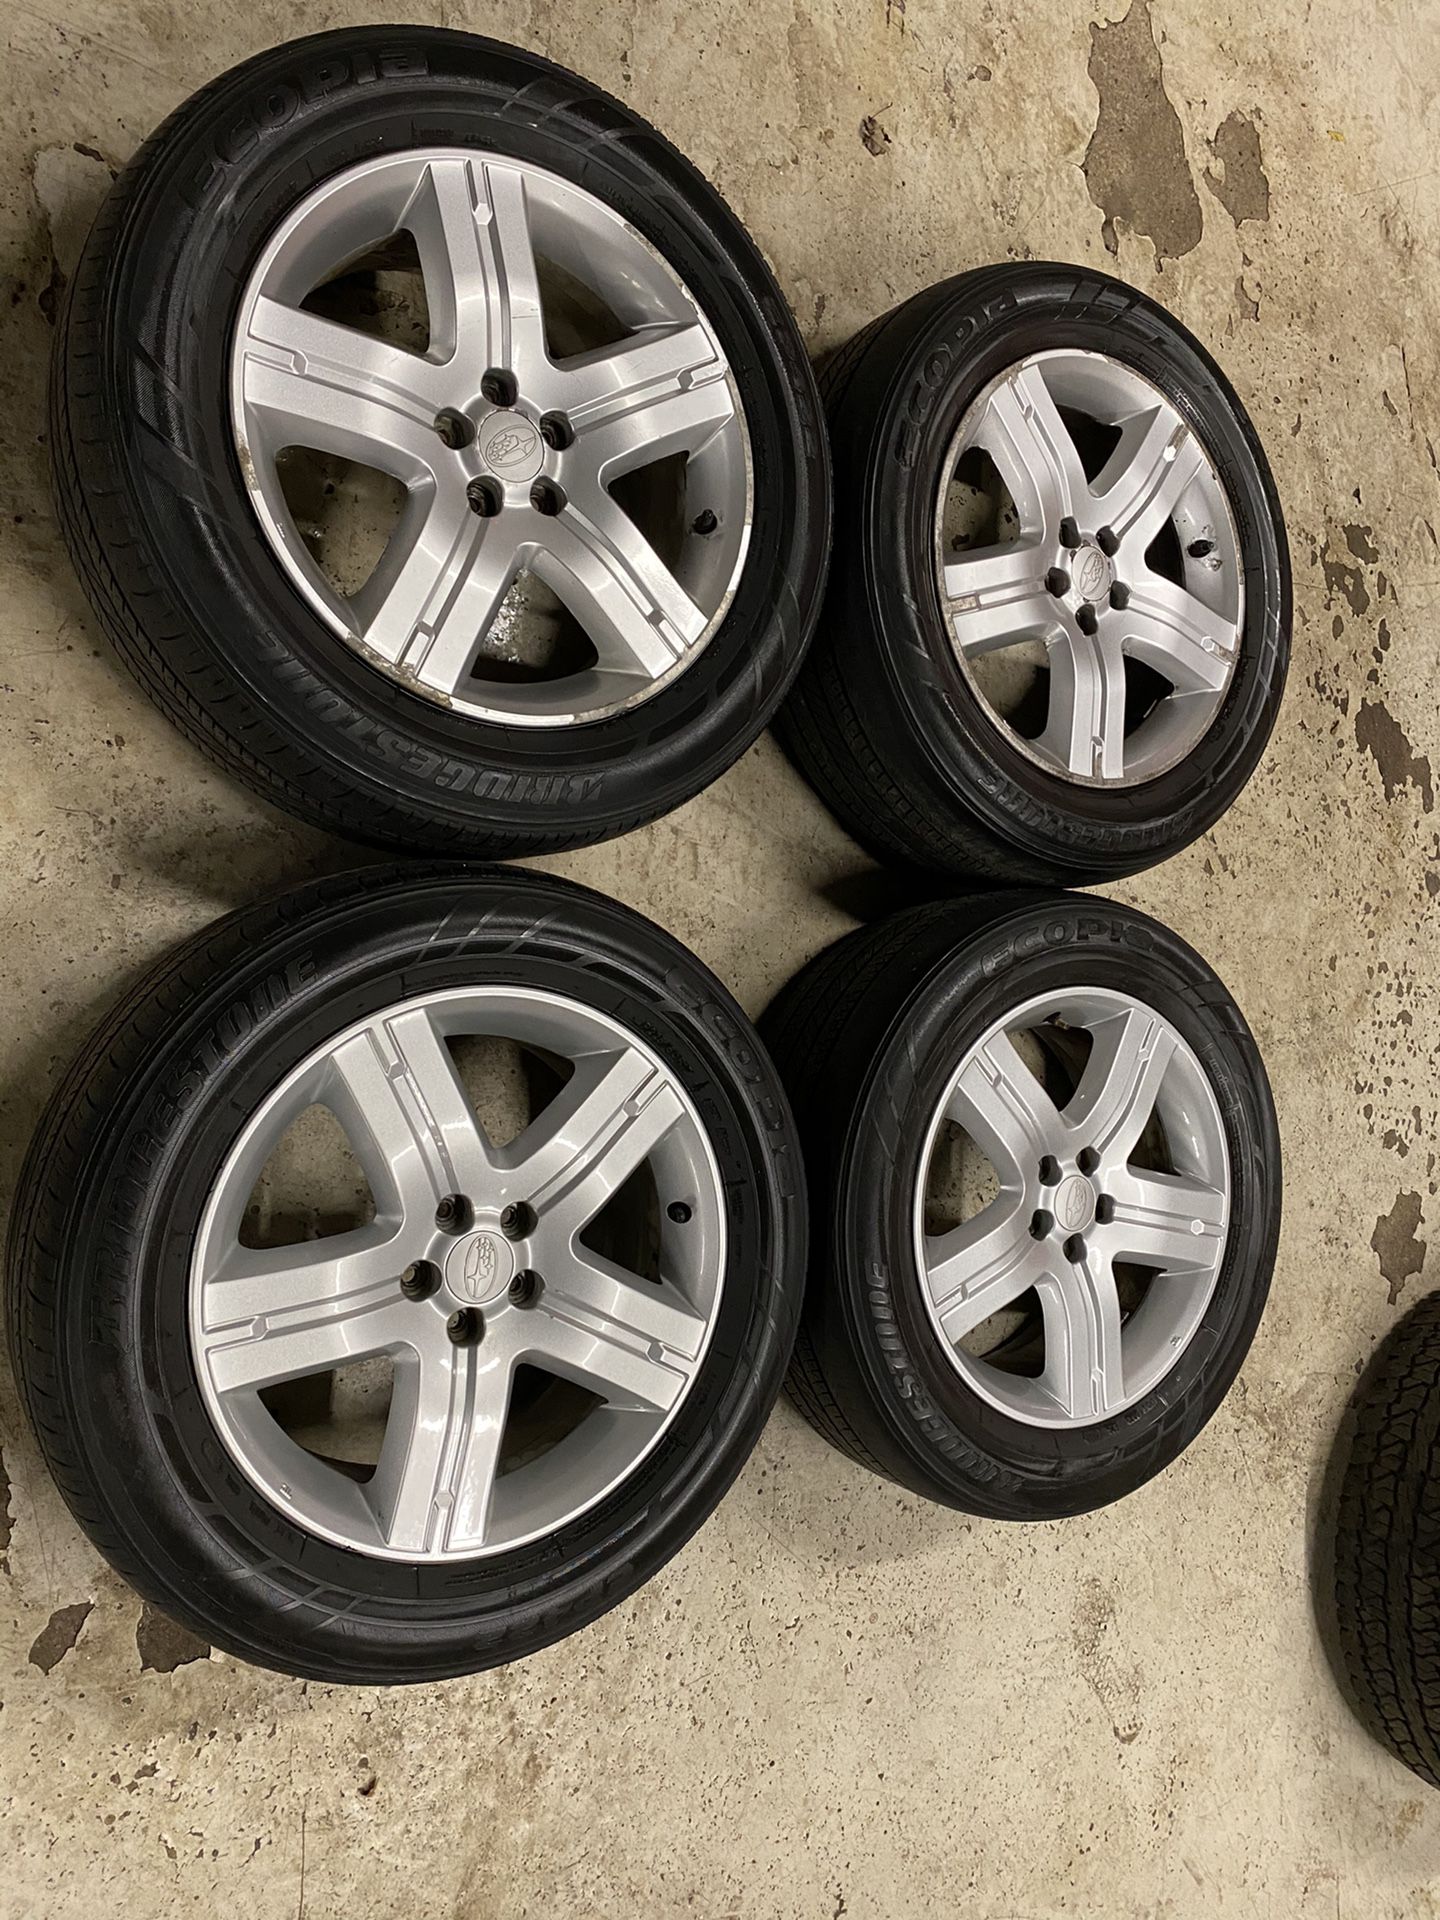 OEM Subaru Outback Wheels and Tires 5x100 225/60/R17